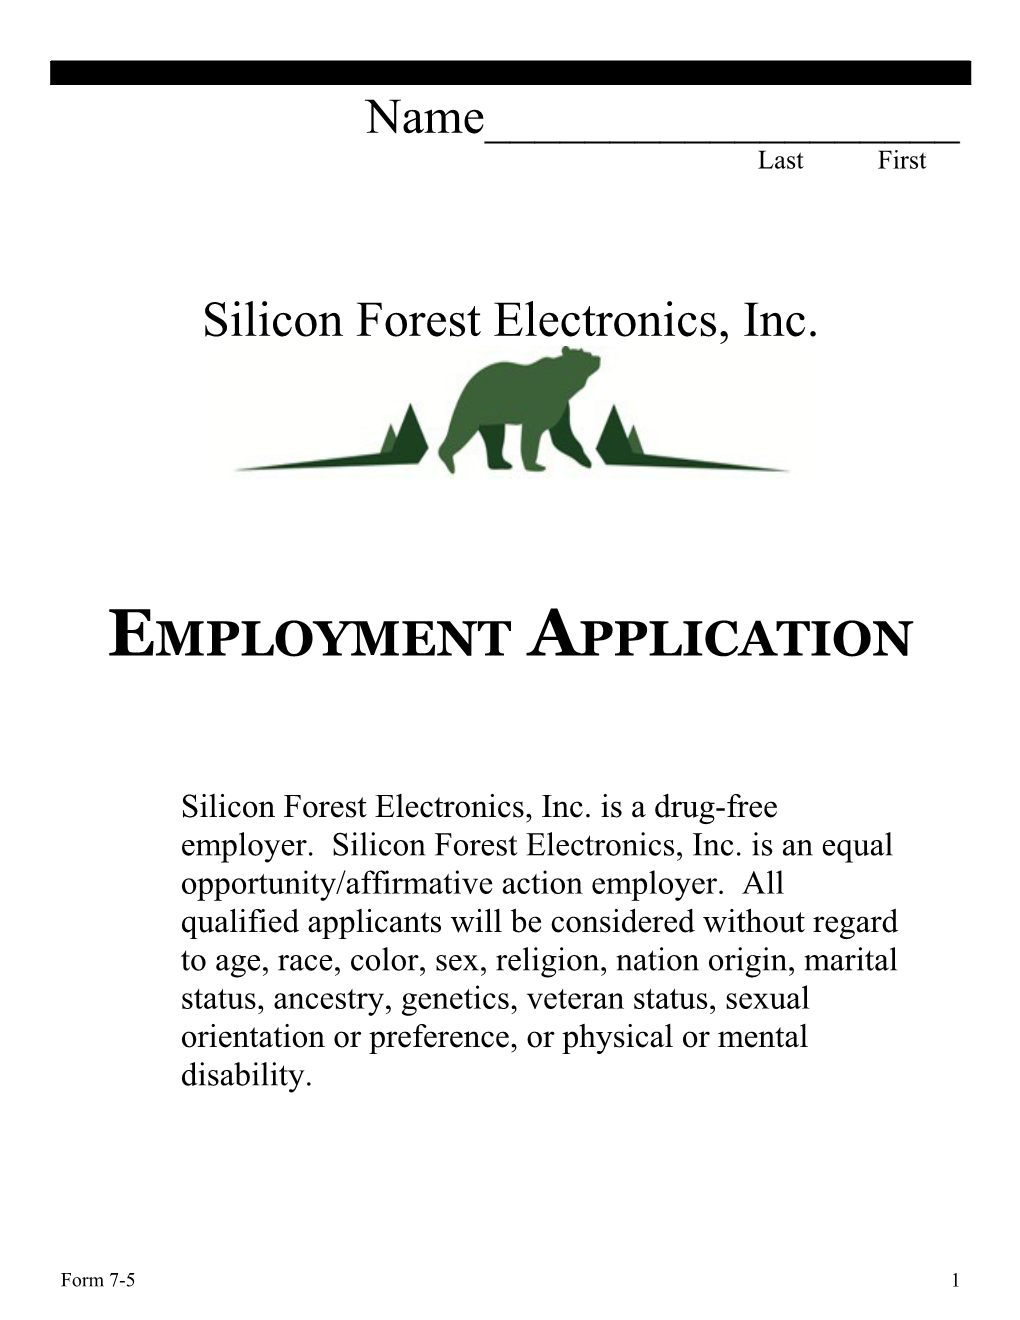 Silicon Forest Electronics, Inc